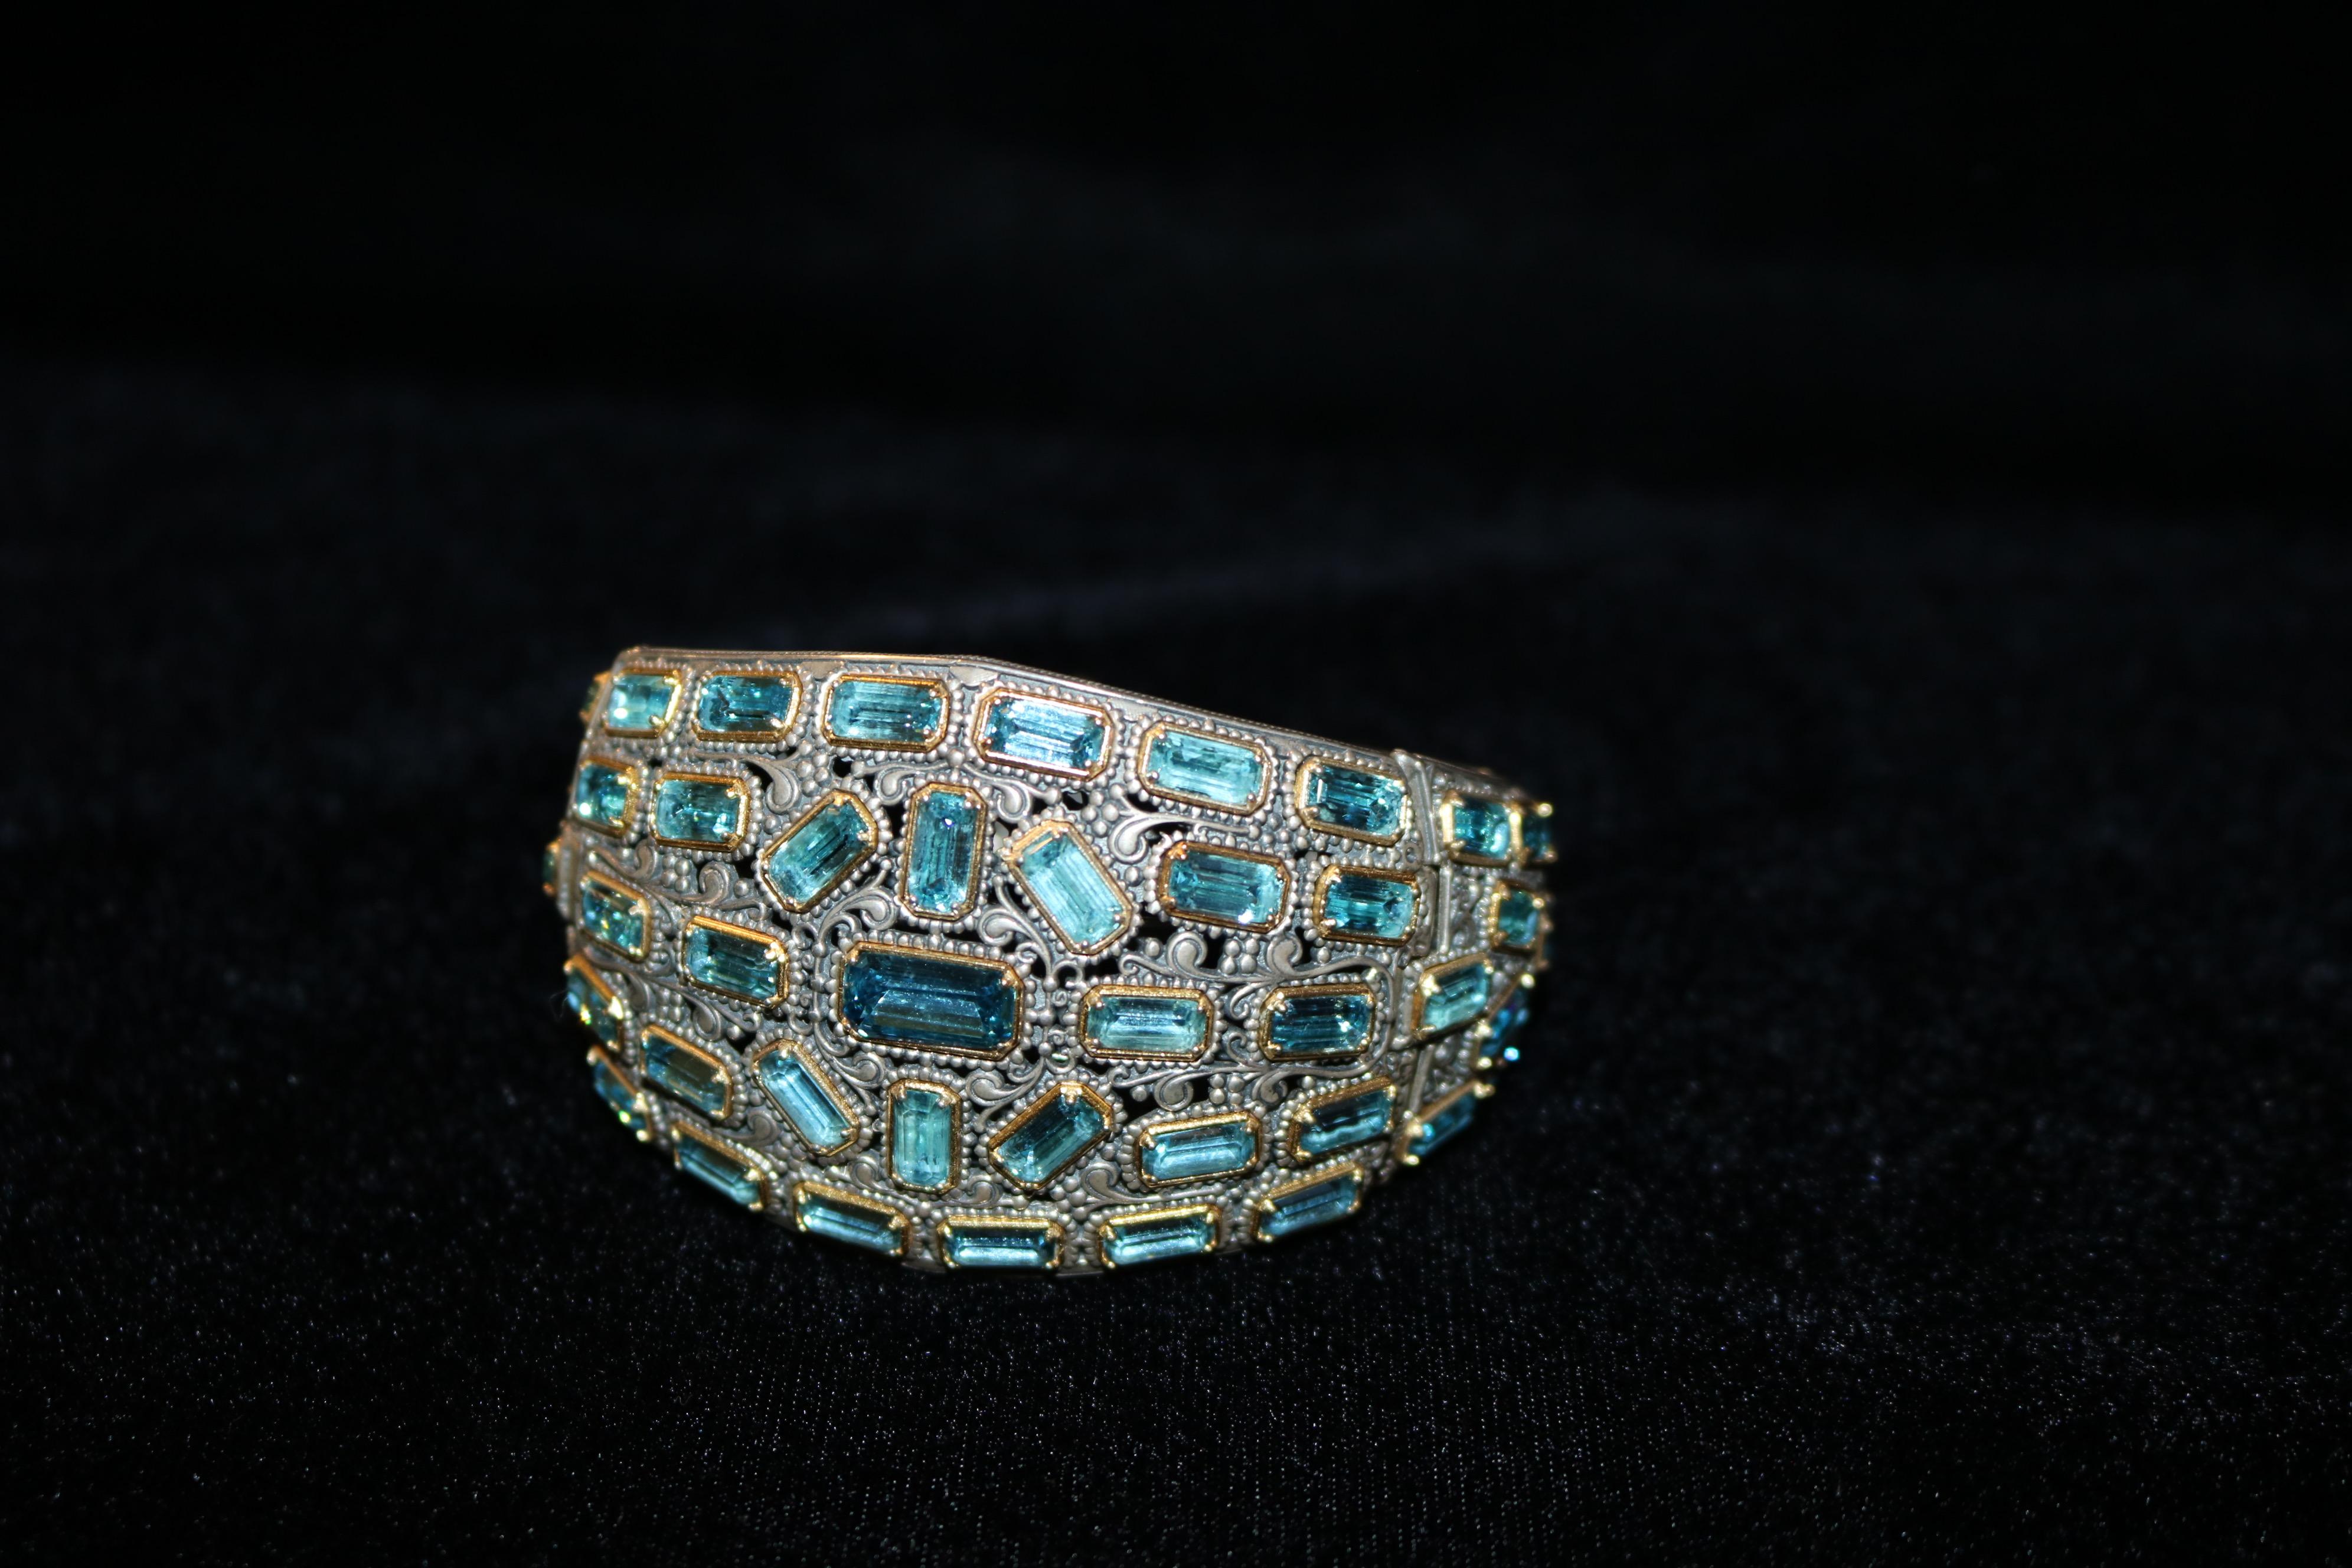 A timeless piece from the Art Deco era, this exquisite vintage bracelet exudes elegance and sophistication.
Crafted in 925 silver & over 18K gold this piece has over 40 natural blue topaz emerald cut stones  making it one of our most remarkable